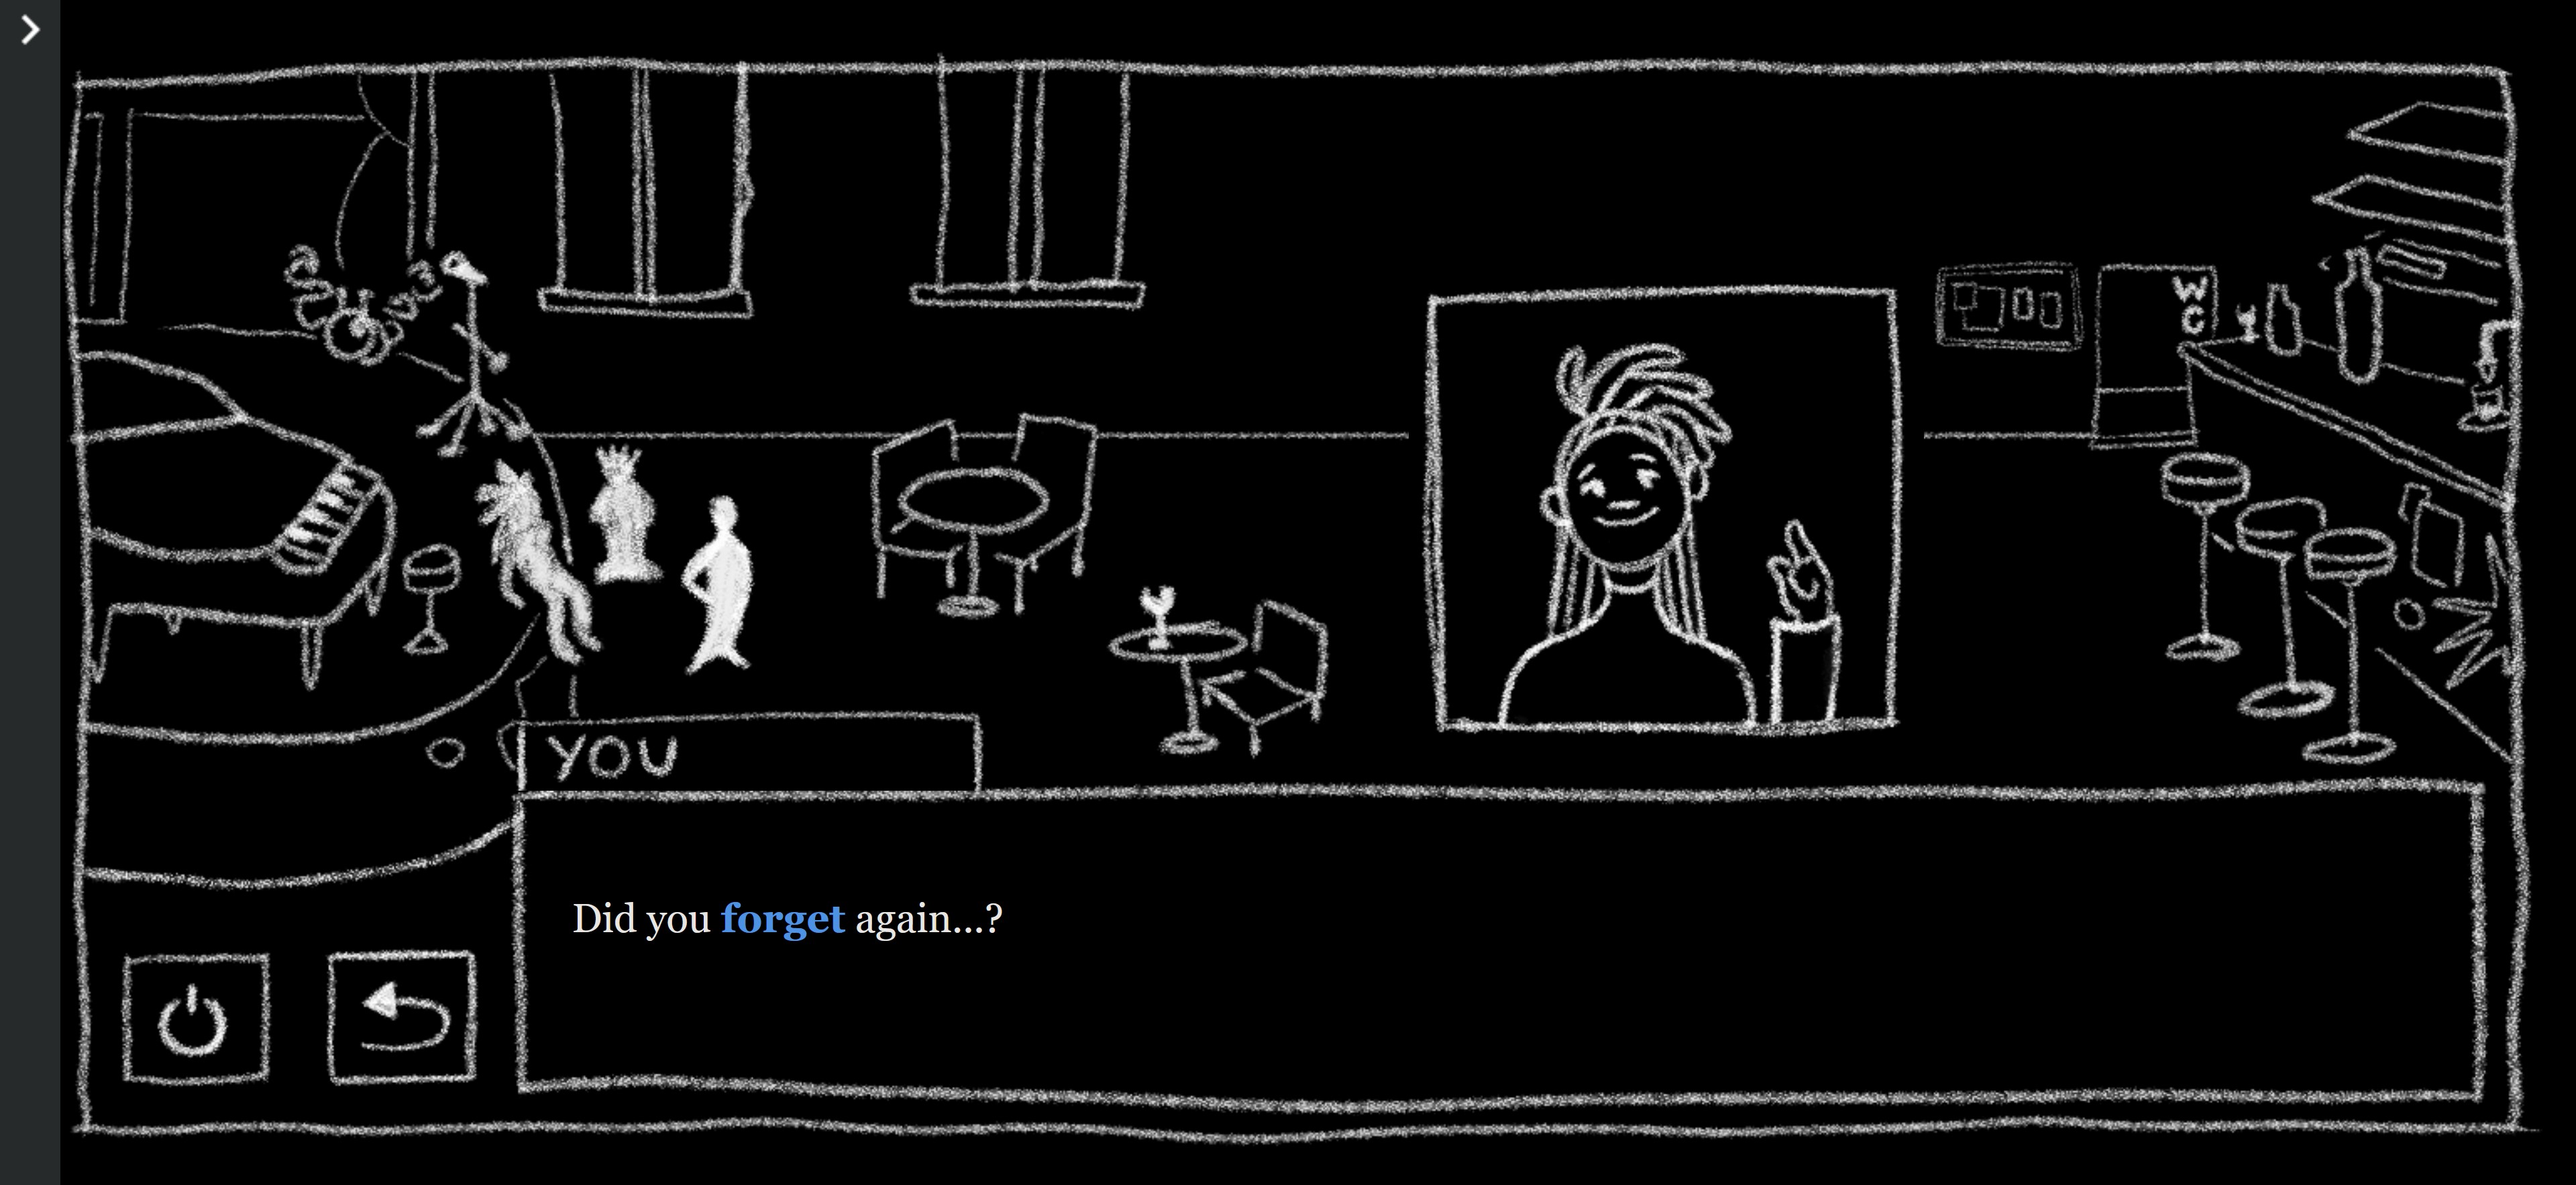 Screenshot of a black and white visual novel style game. The background is a jazz bar and there is a character portrait of a smiling girl with braids and a pointing finger on screen. The player character, labelled as 'you' is saying 'Did you forget again...?'. The word 'forget is highlighted in blue'.